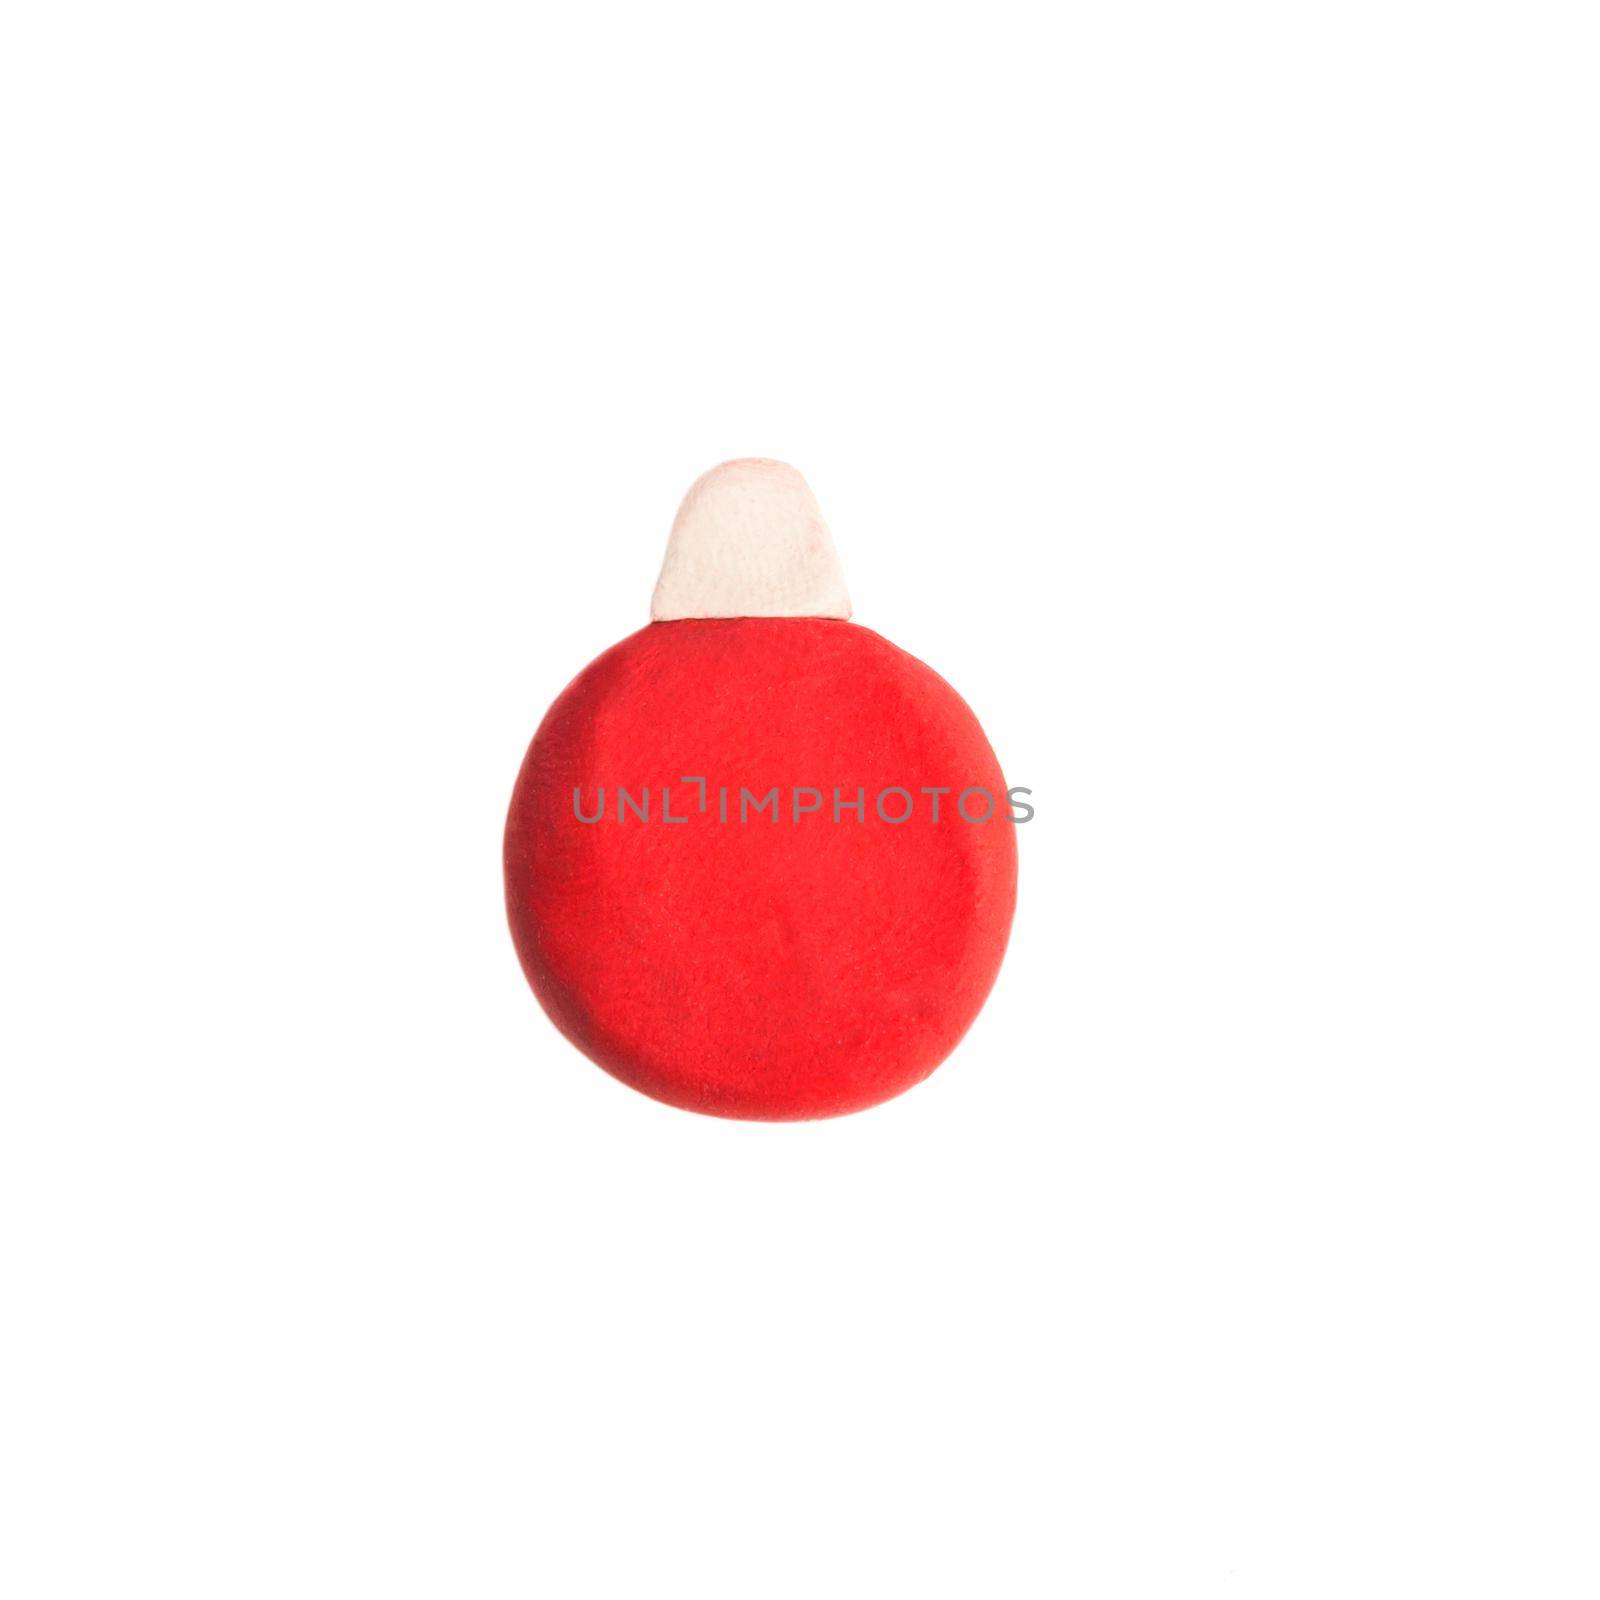 plasticine figure of red christmas tree toy isolated on white background